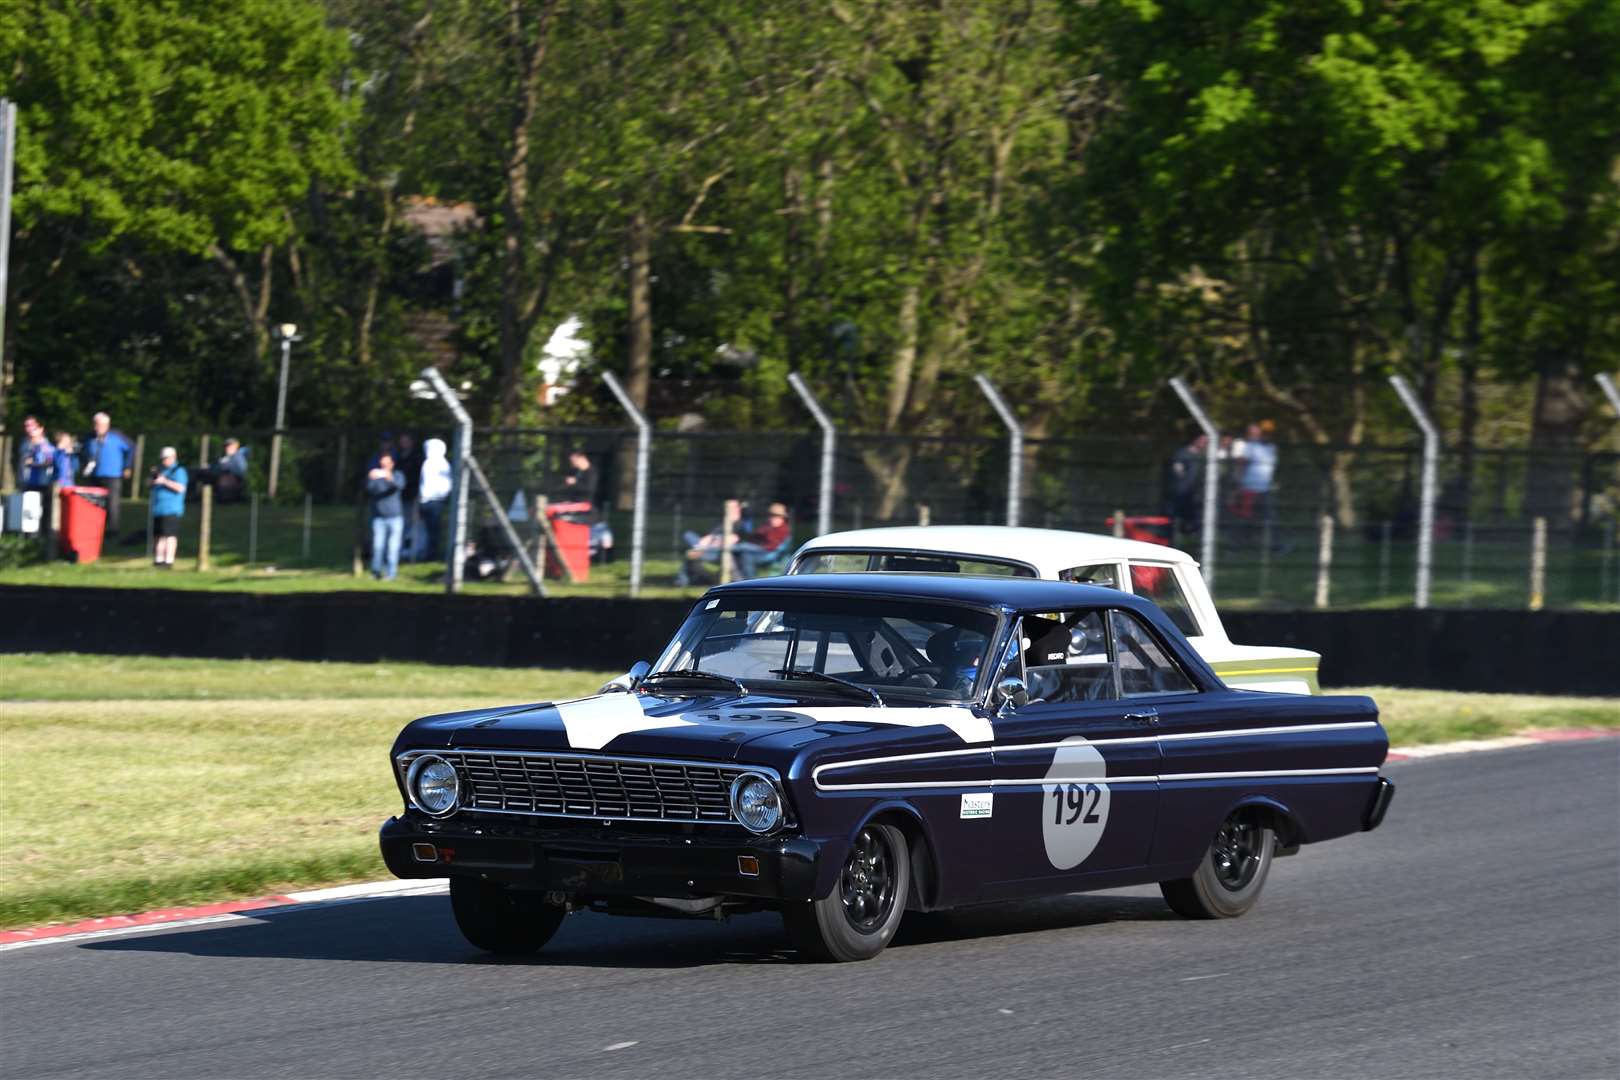 Julian Thomas and Calum Lockie won the Pre-66 Touring Cars race in their Ford Falcon. Picture: Simon Hildrew